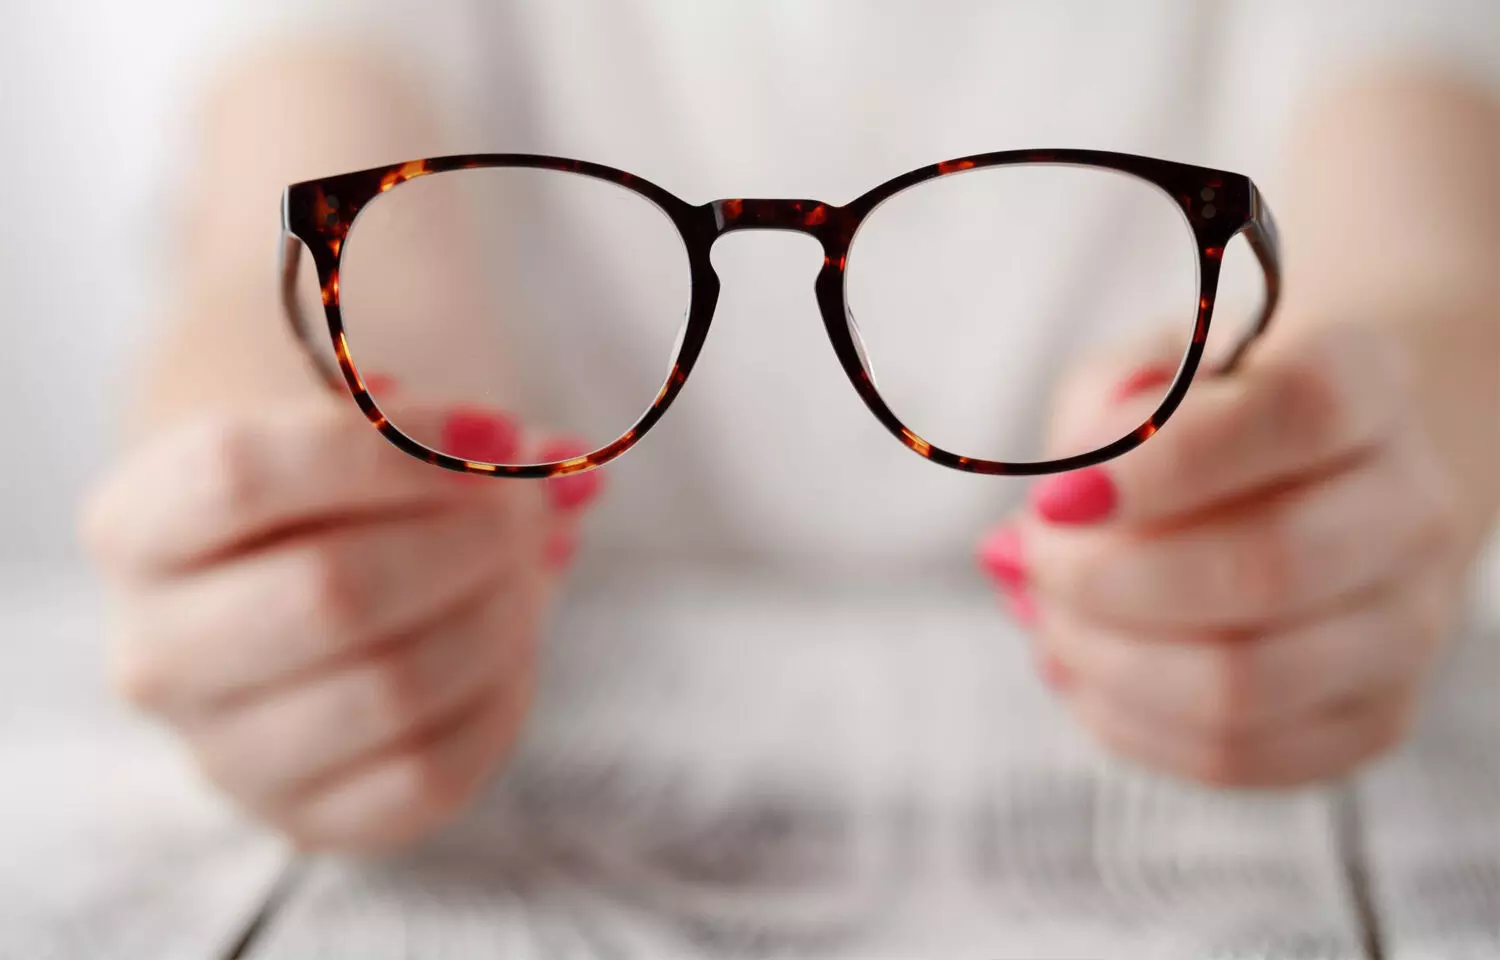 Can wearing glasses reduce COVID-19 infection risk? JAMA study provides insights